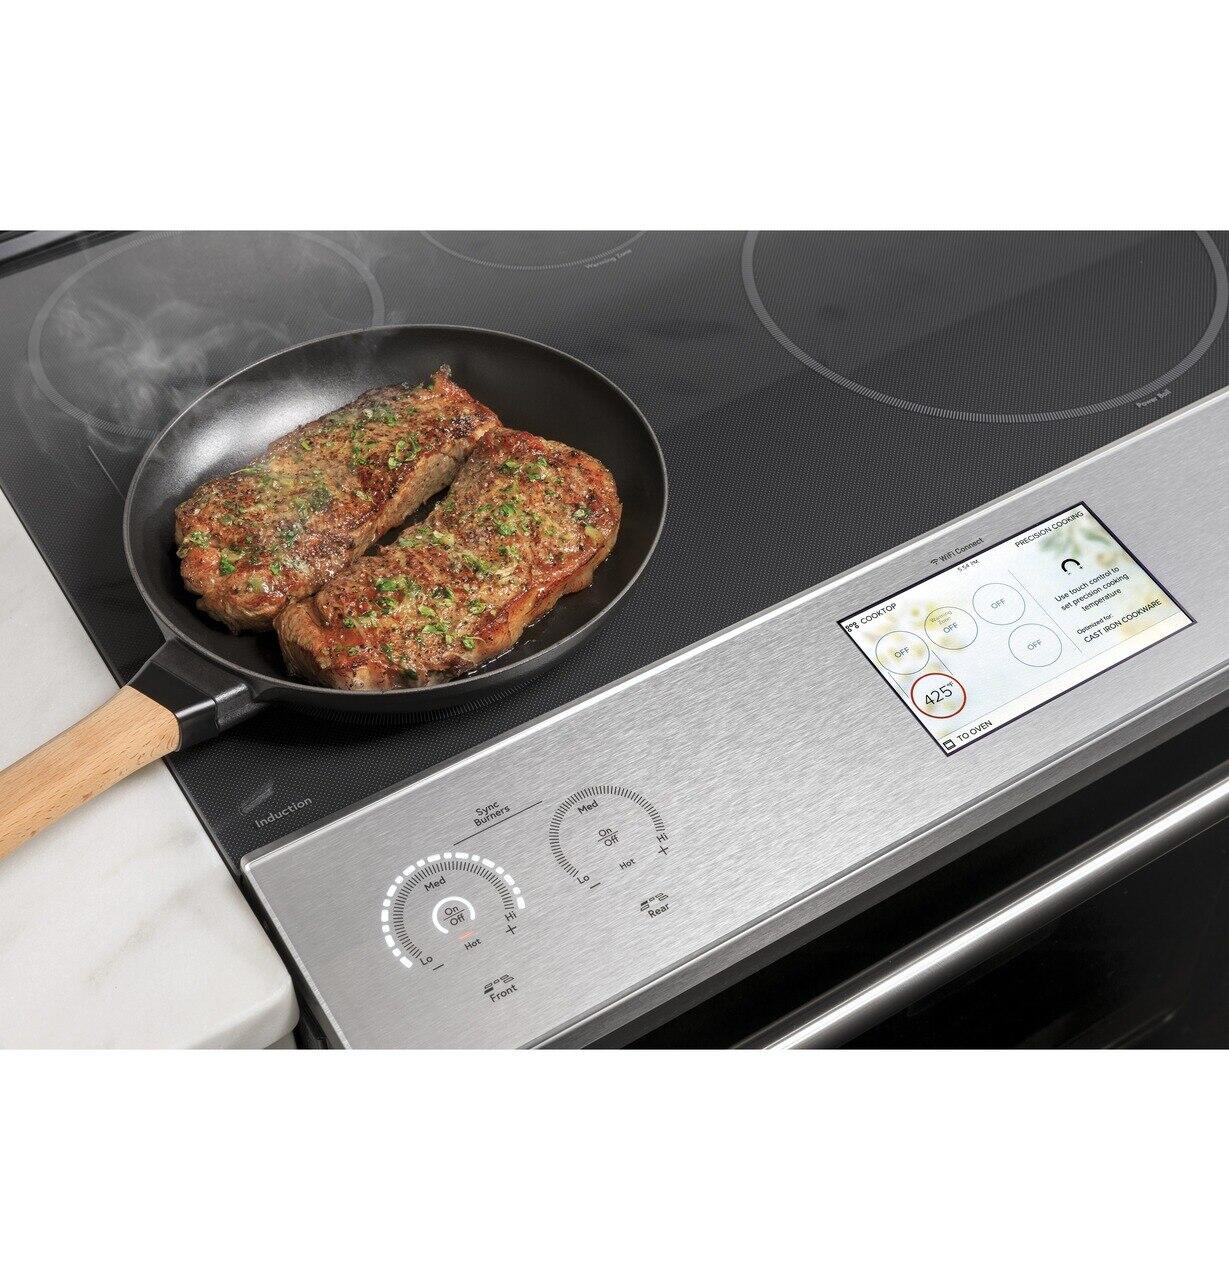 2 x Portable Electric Cooker (Glass Ceramic, Cast Iron), 2500w, 5